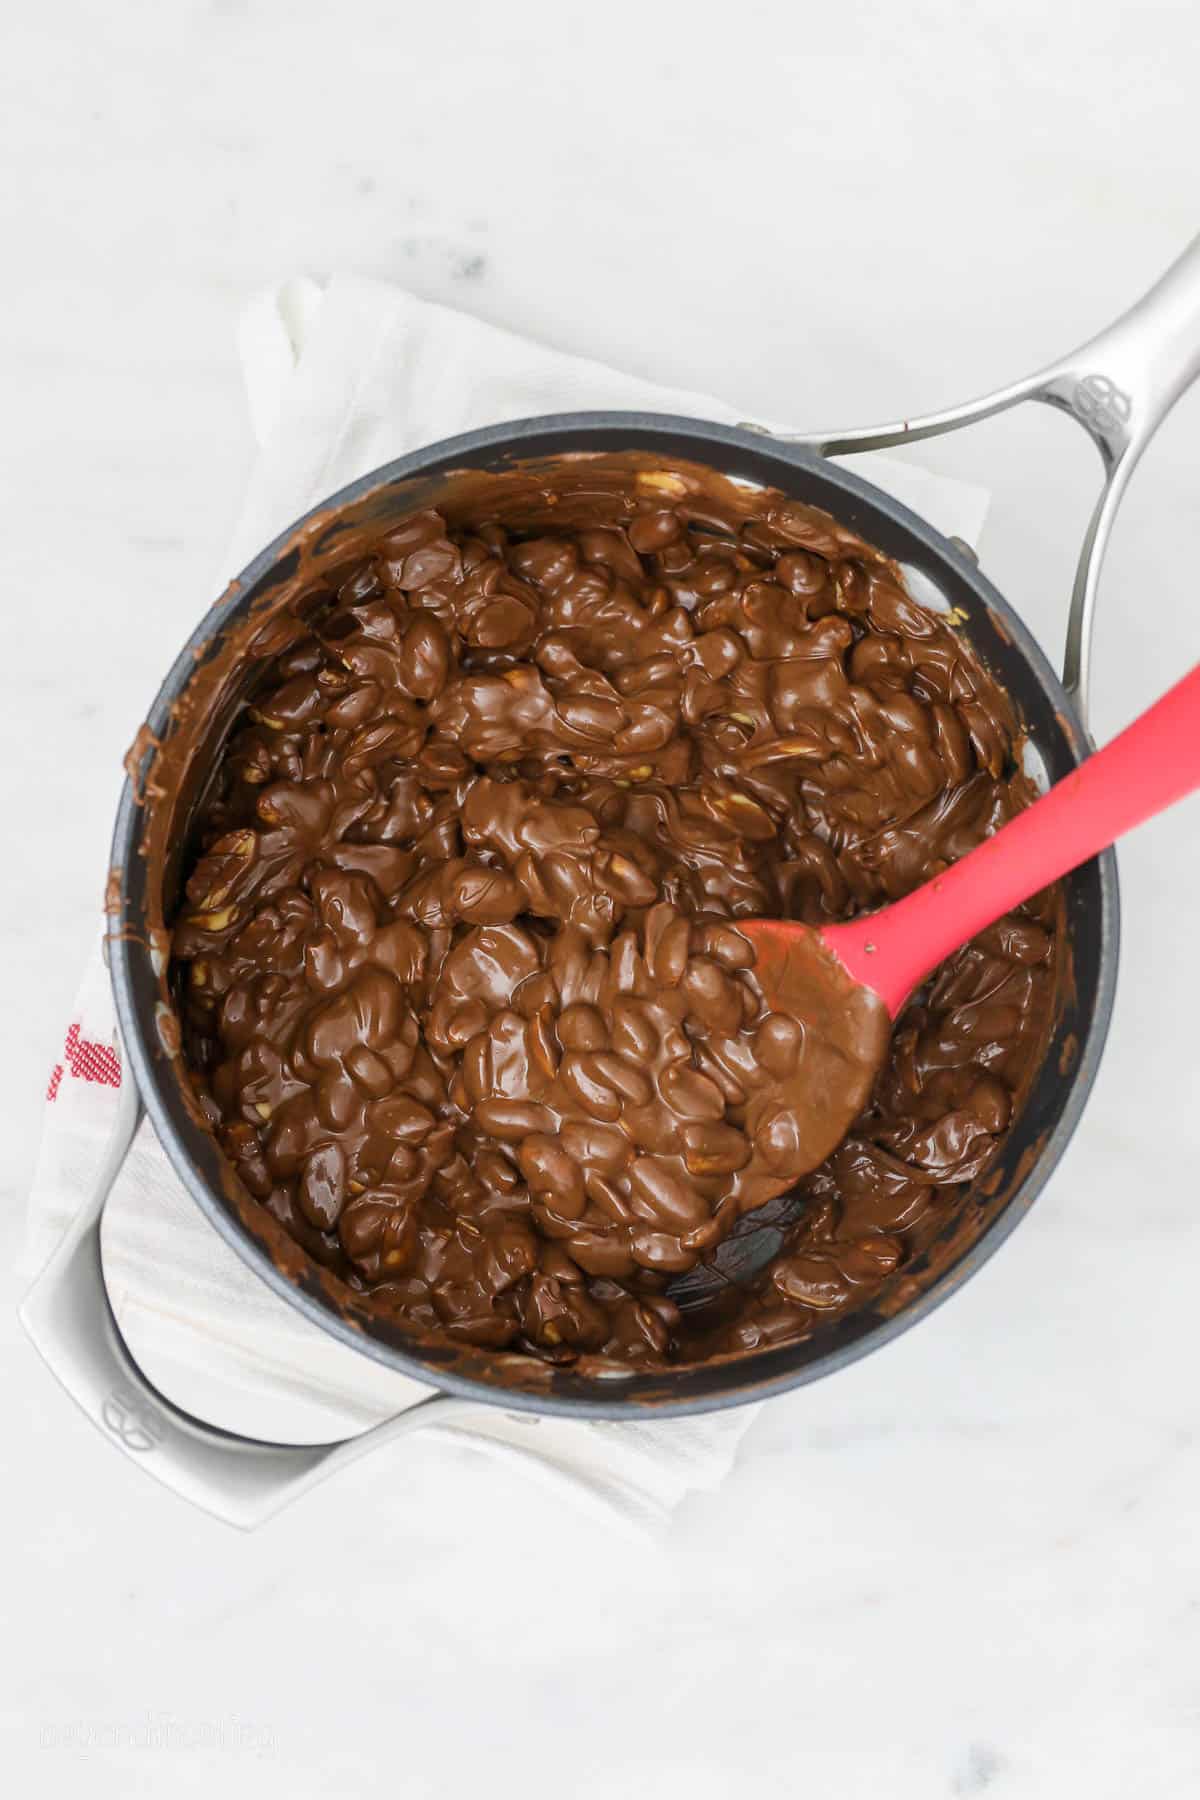 overhead of melted chocolate and peanut butter mixed with peanuts in a saucepan with a red spoon